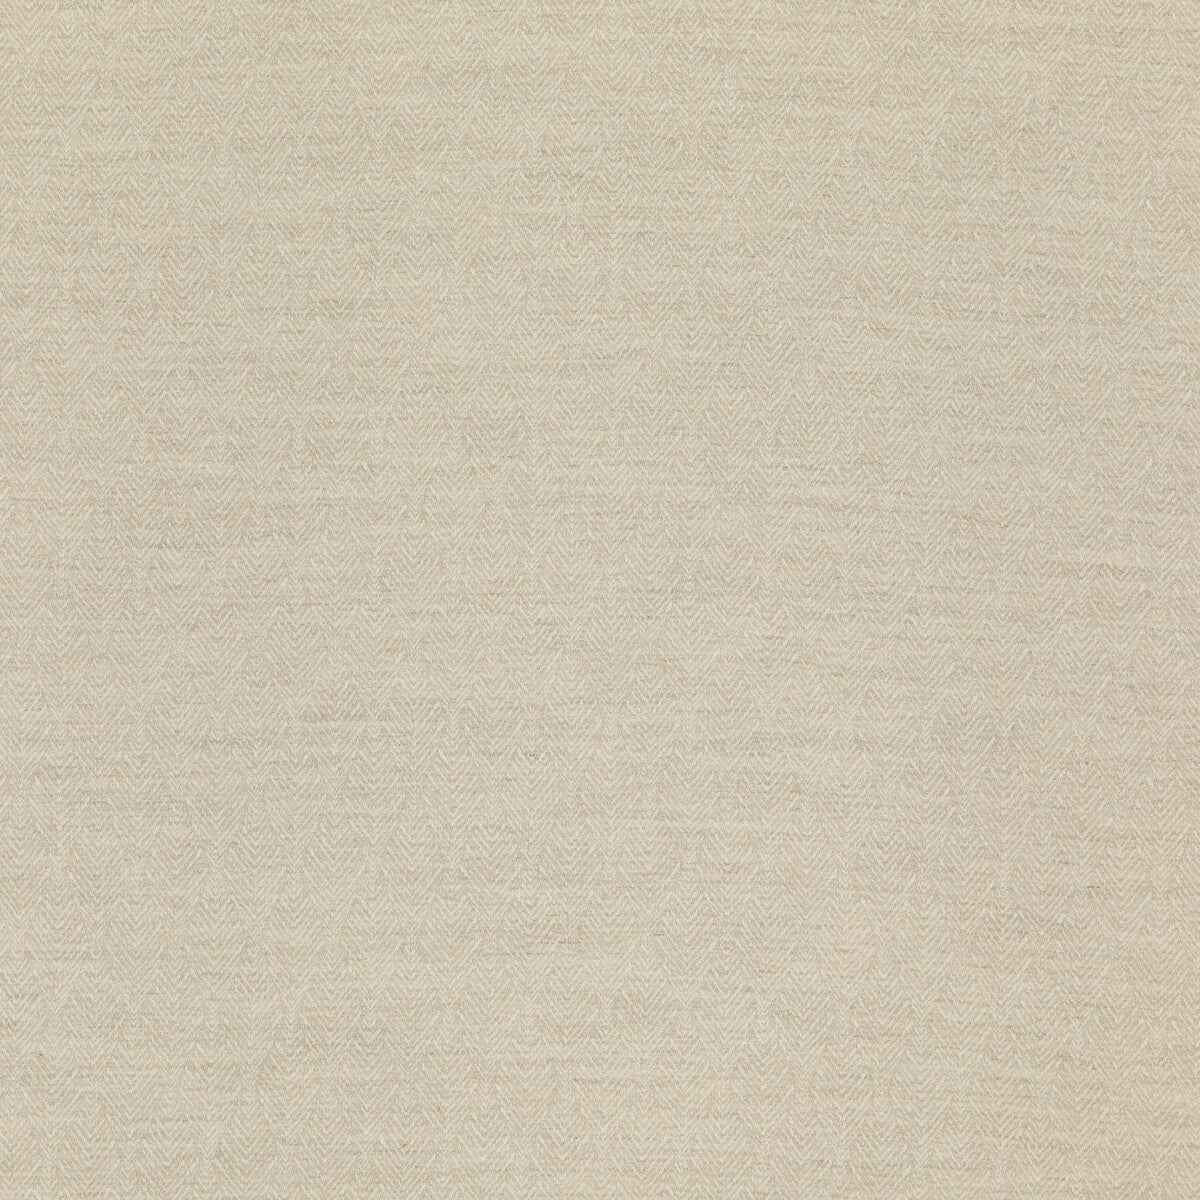 Capo fabric in taupe color - pattern ED85298.210.0 - by Threads in the Luxury Weaves collection